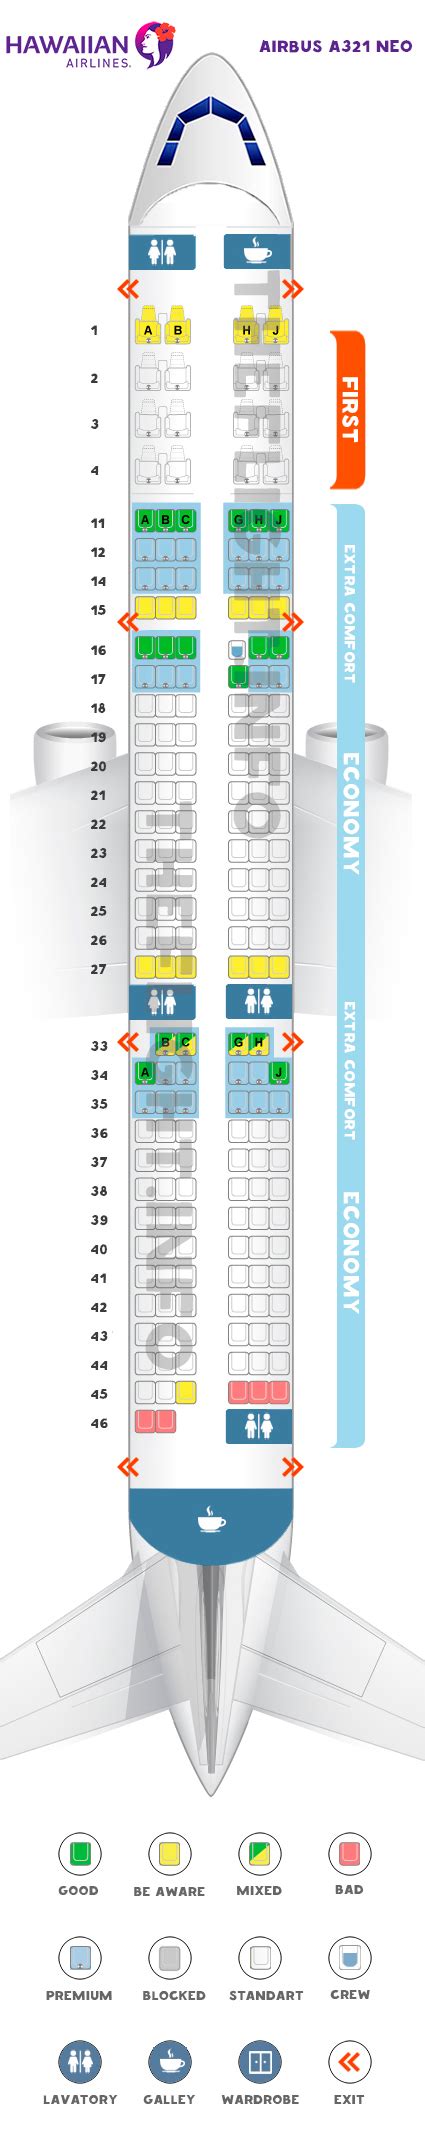 Hawaiian Airlines Airbus A321 Seat Map